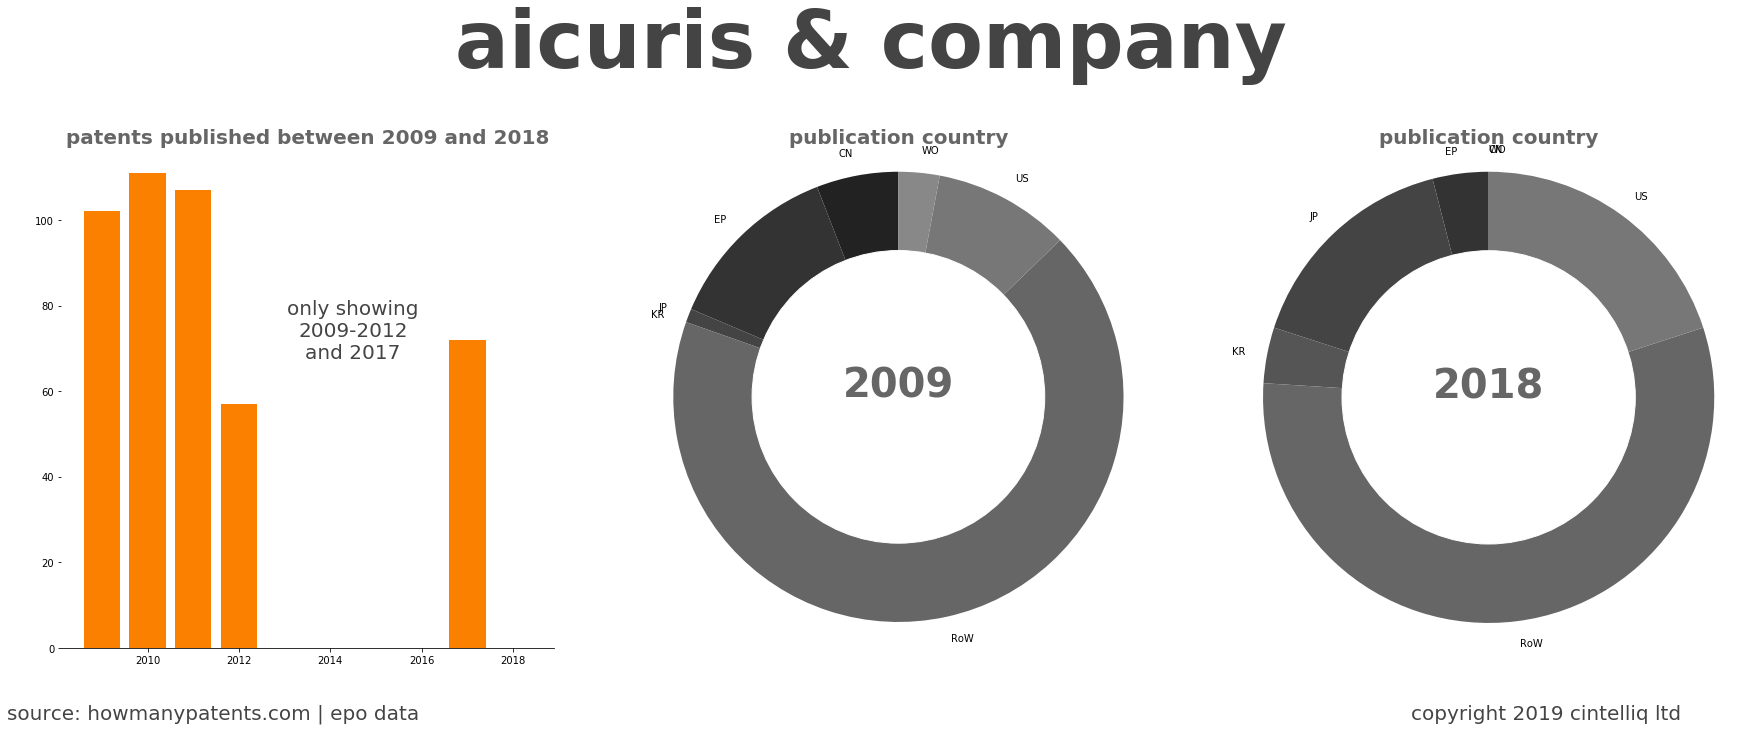 summary of patents for Aicuris & Company